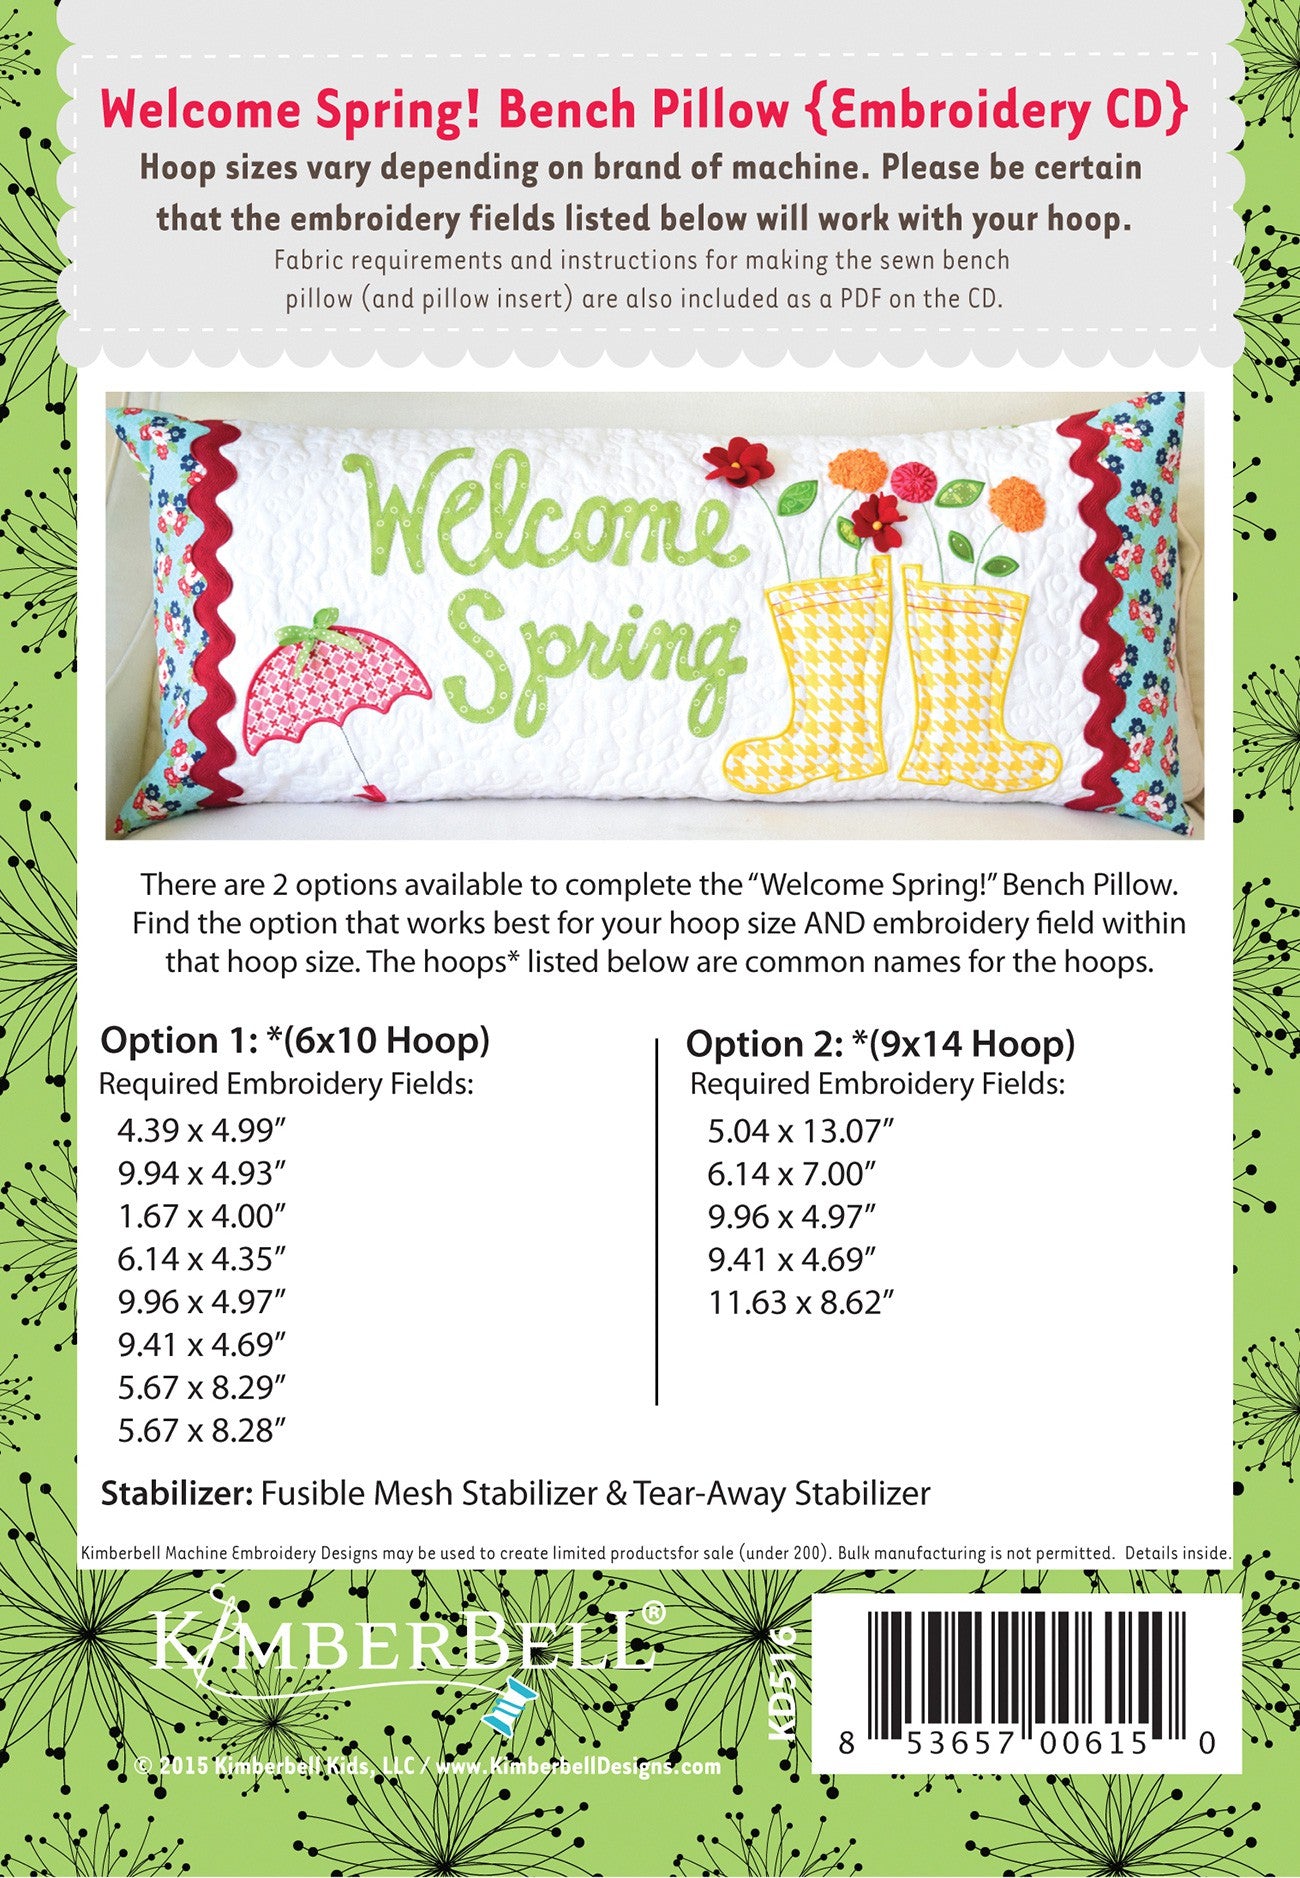 Kimberbell Welcome Spring!, Bench Pillow Machine Embroidery CD